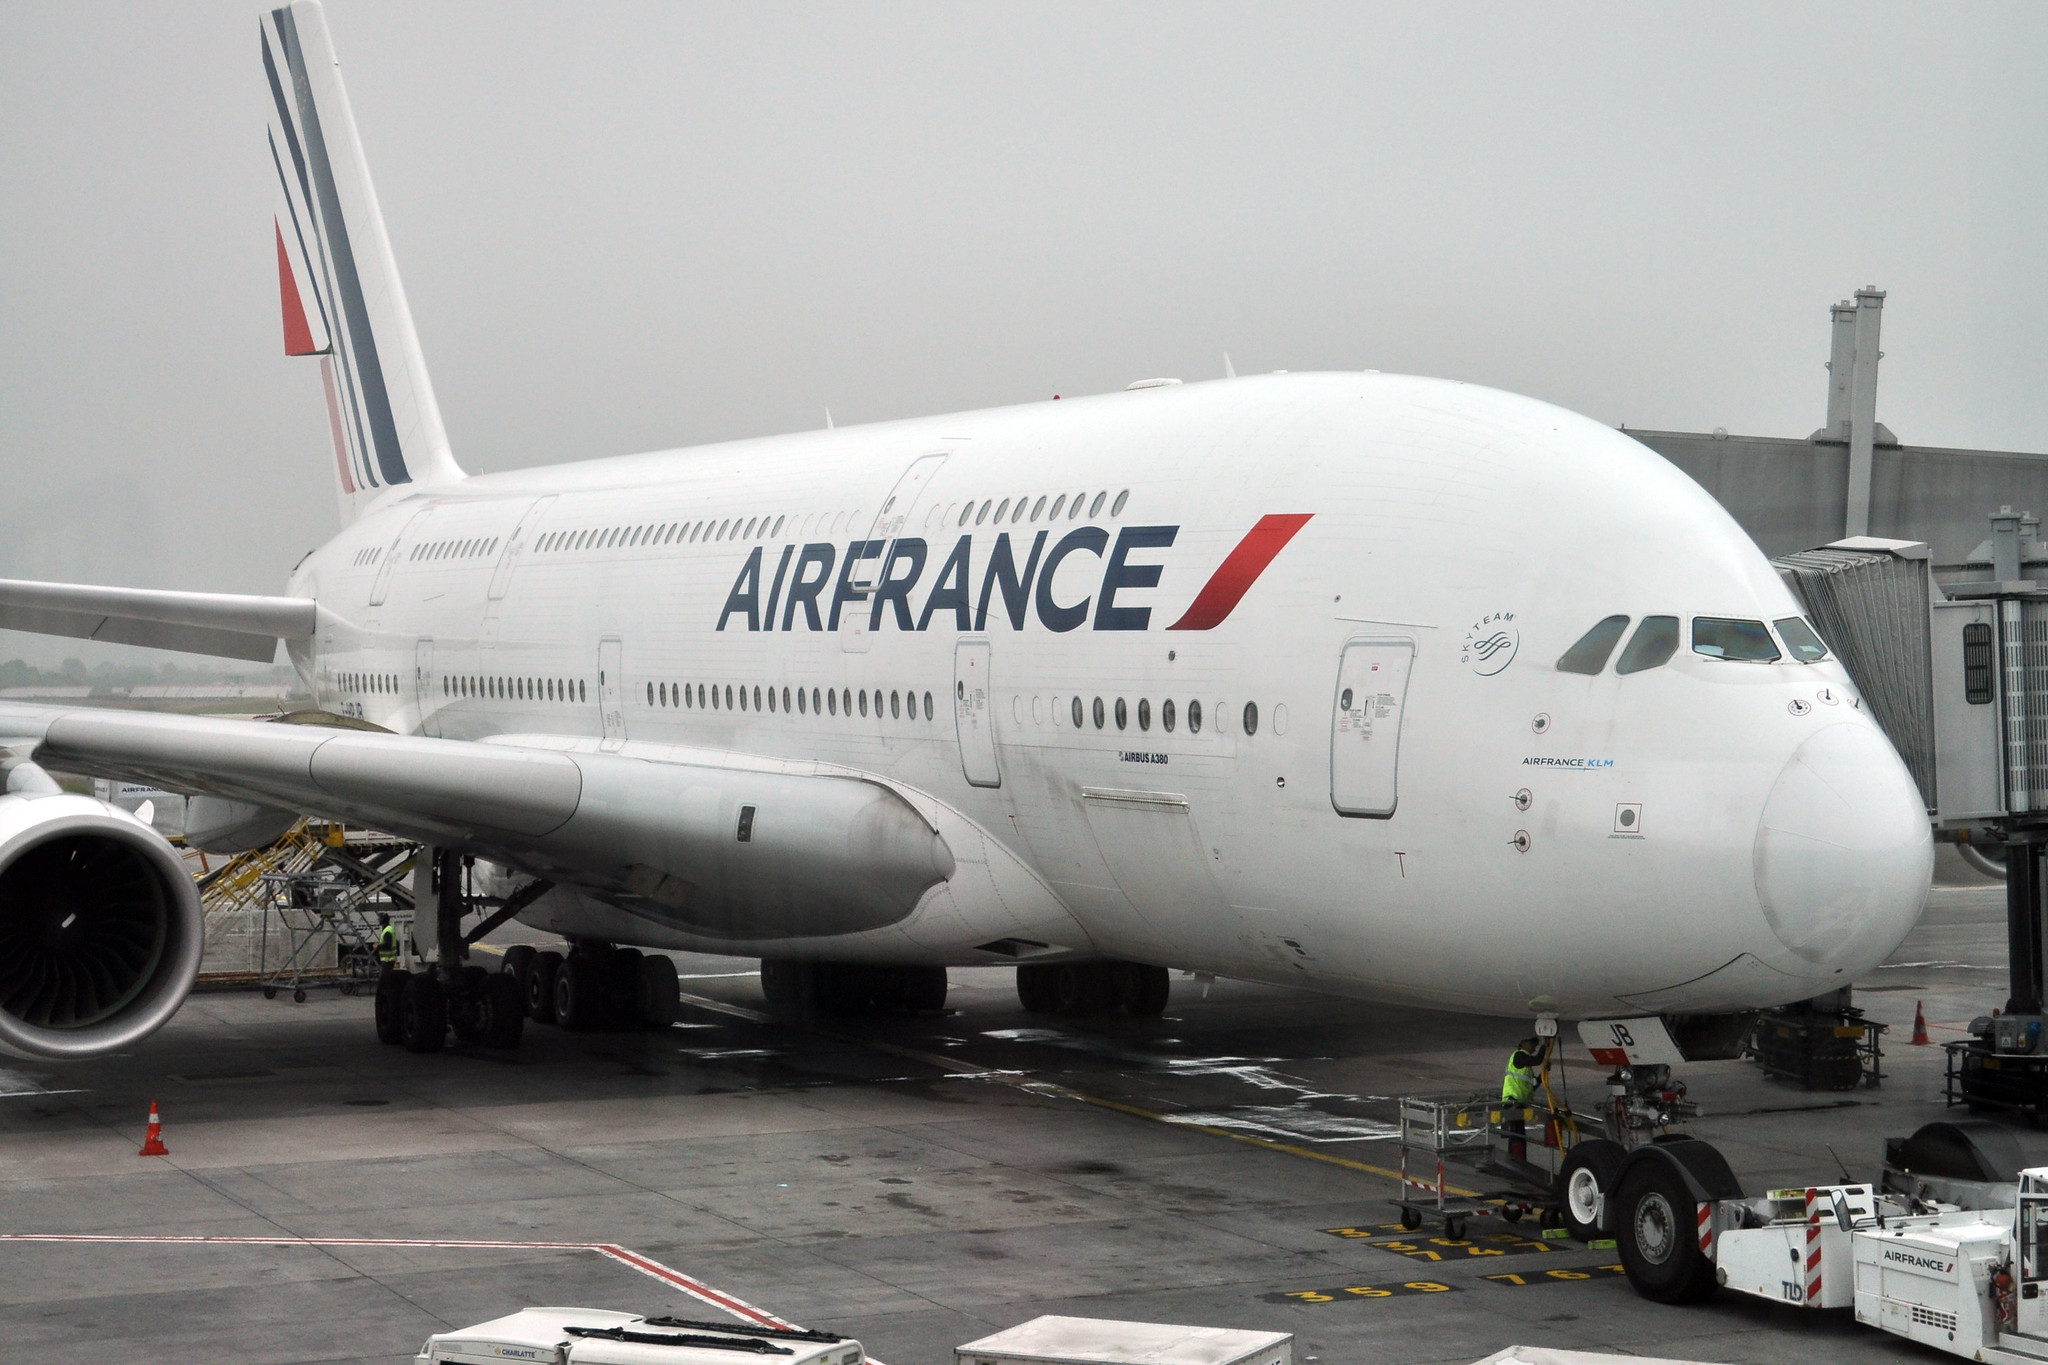 Air France A380s: Where Are They Now? - Airport Spotting